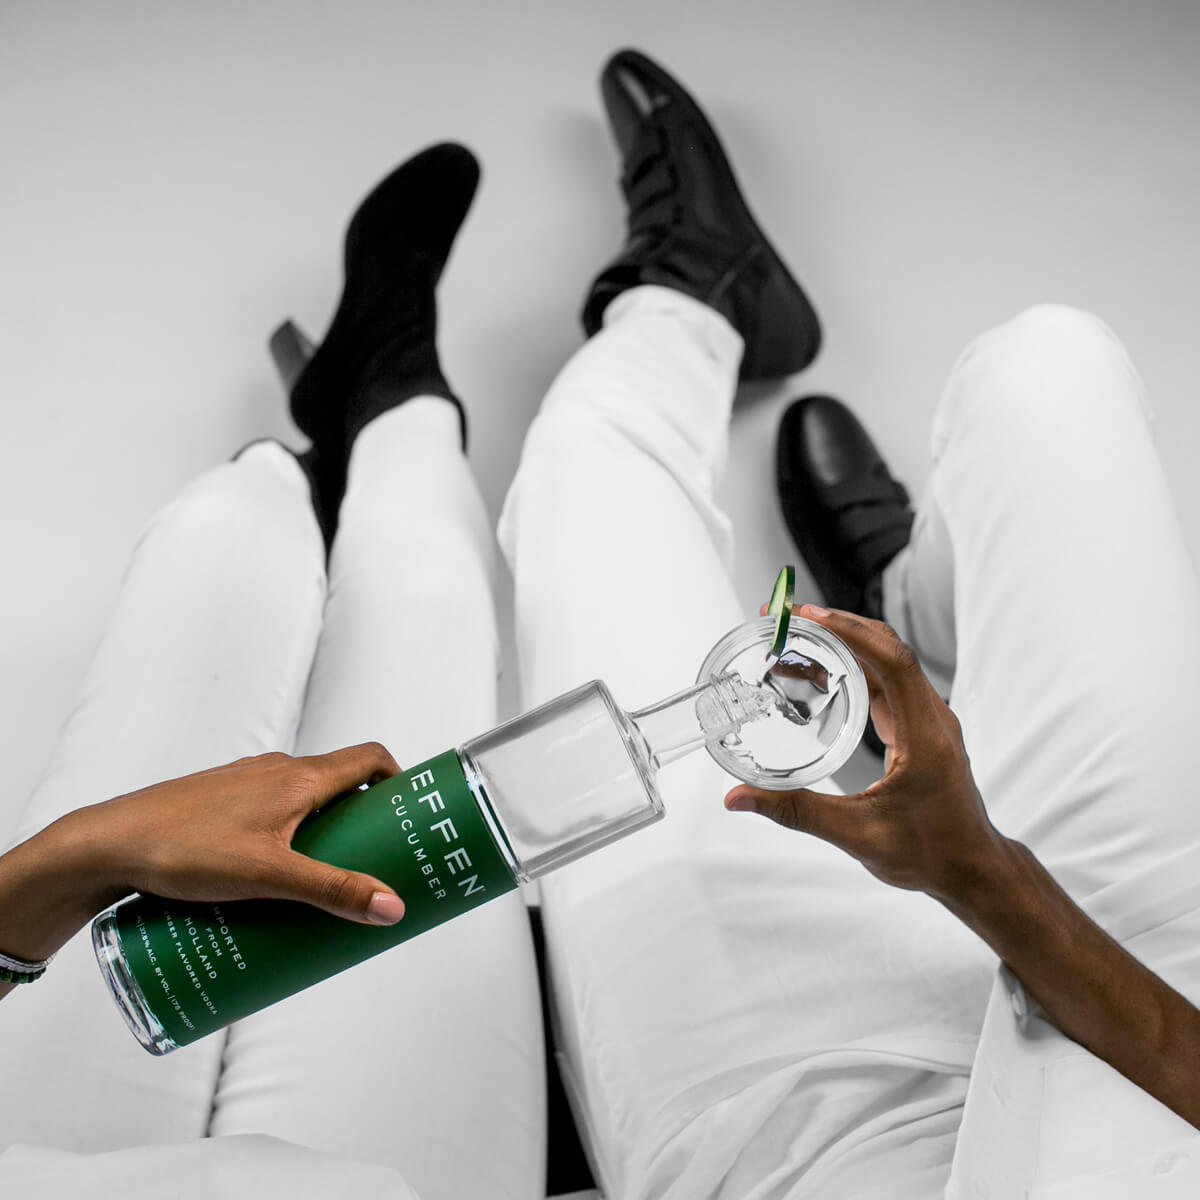 Cool as cucumber with EFFEN Cucumber Vodka. Be yourself!